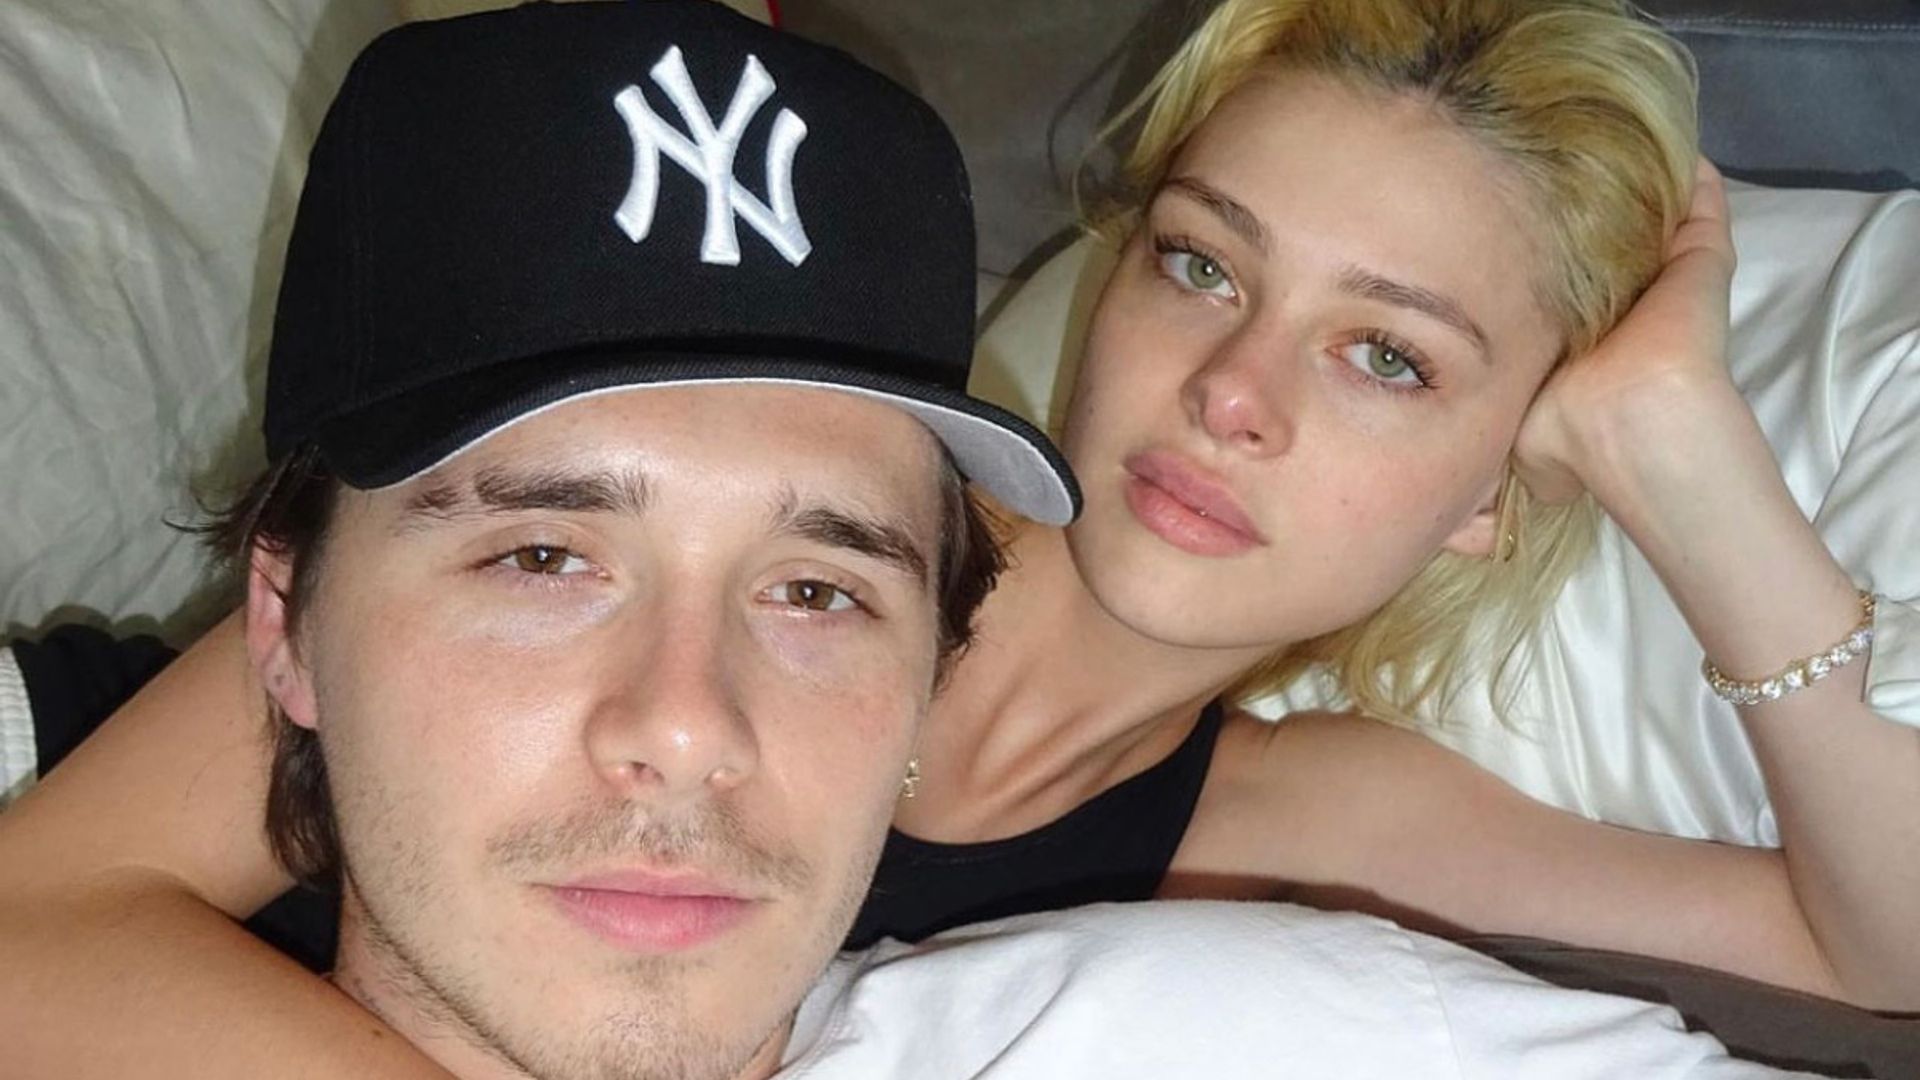 Brooklyn Beckham seriously divides fans with new photo – fiancée Nicola Peltz reacts